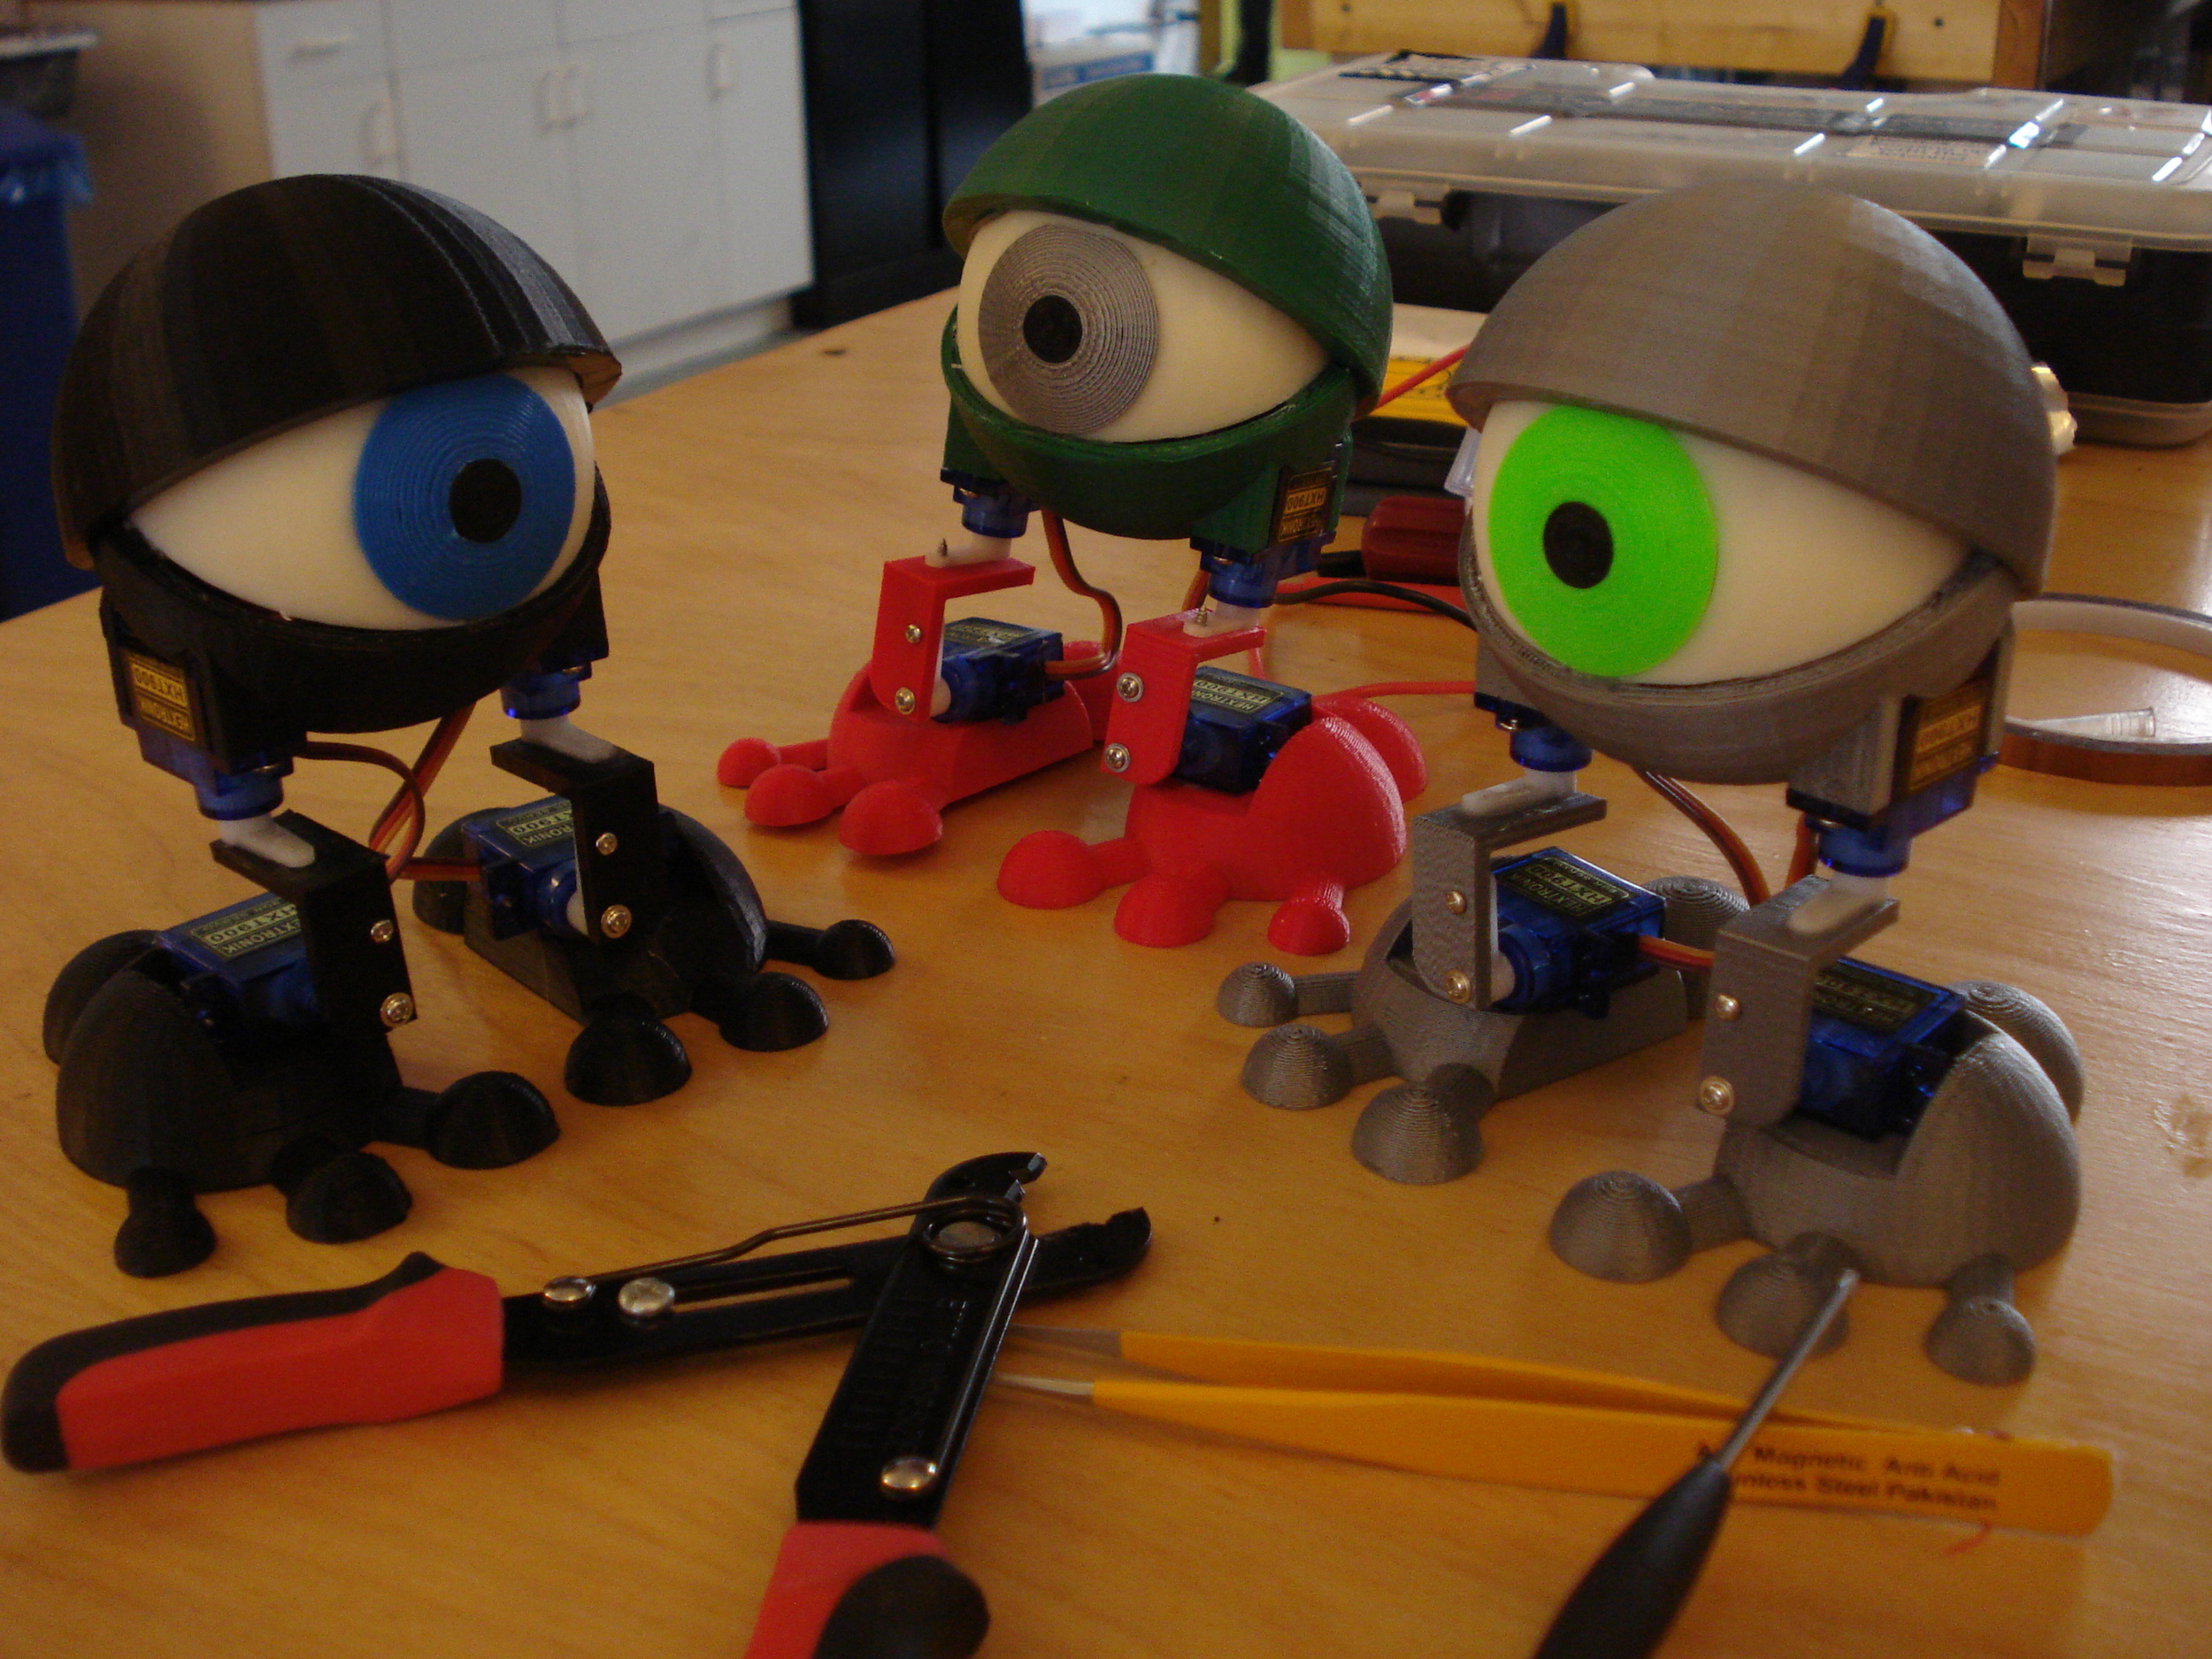  Minion found his friends! Now we can all walk to  @makerfairekc  and prepare take over the world. 